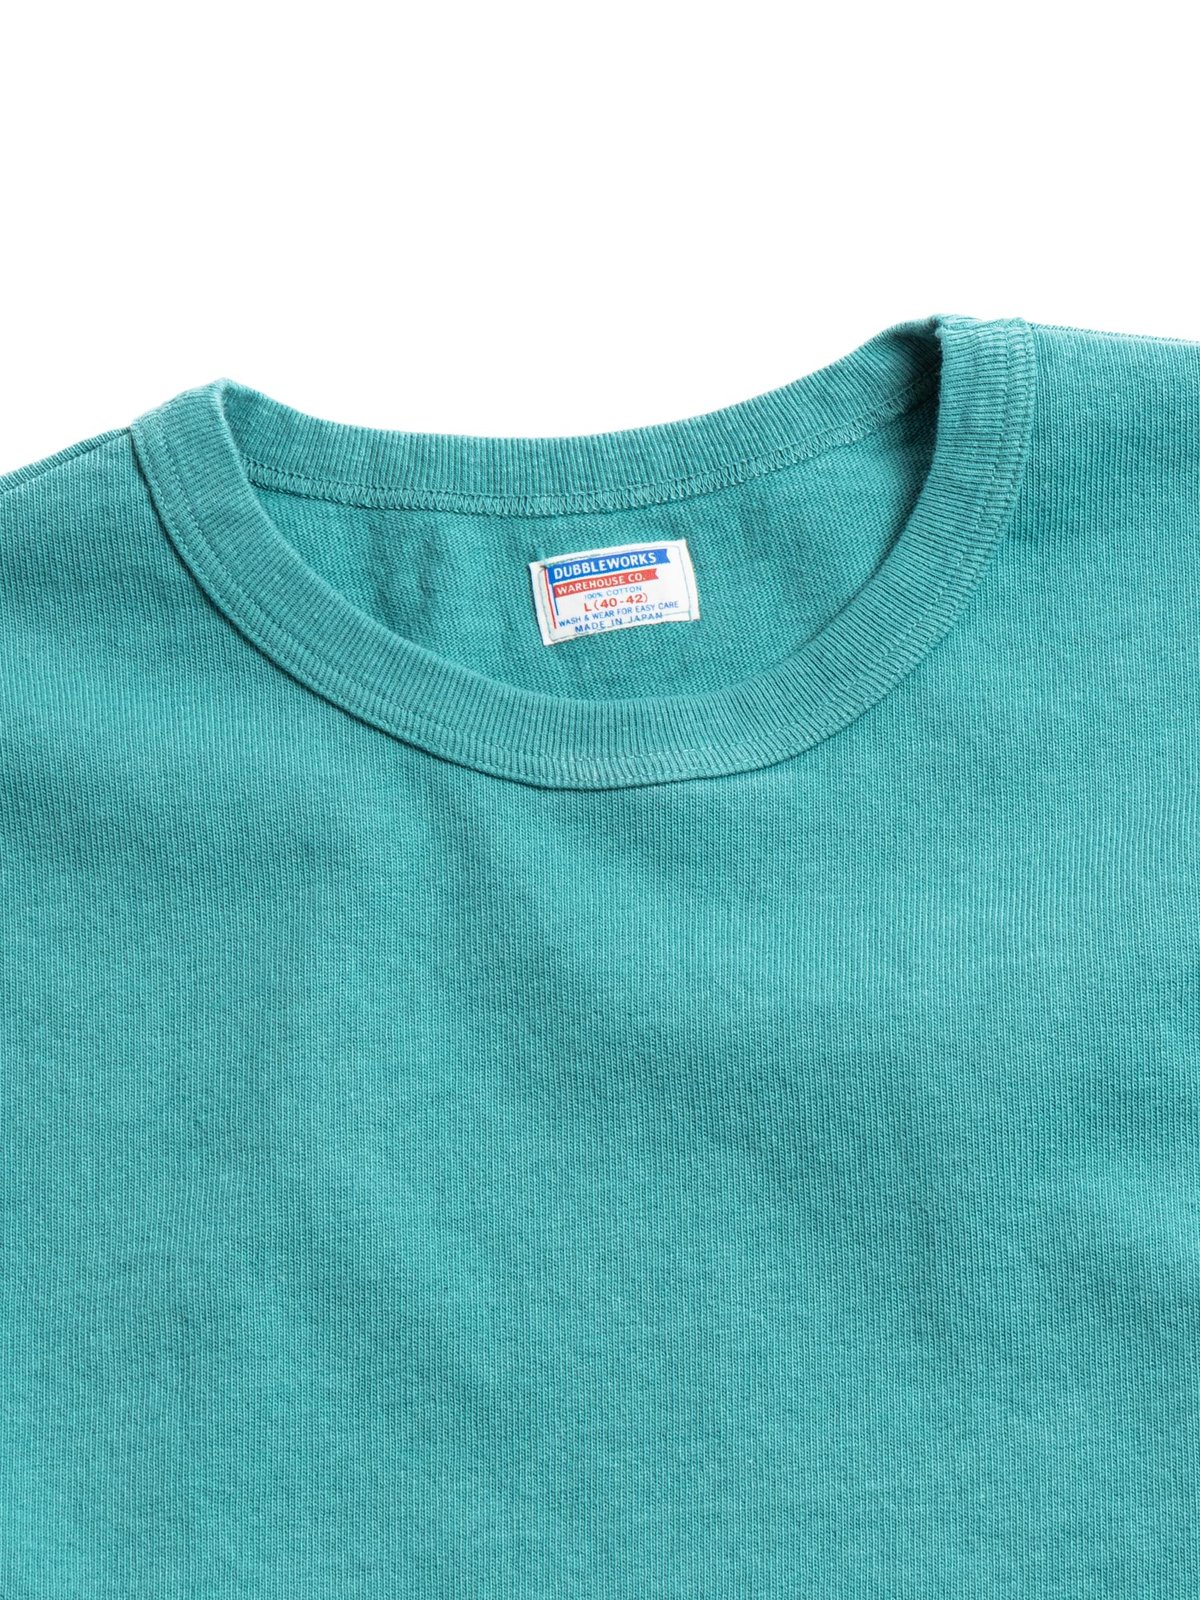 LOT.58001 H.W. L/S TEE PIGMENT DYE TURQUOISE - Image 2